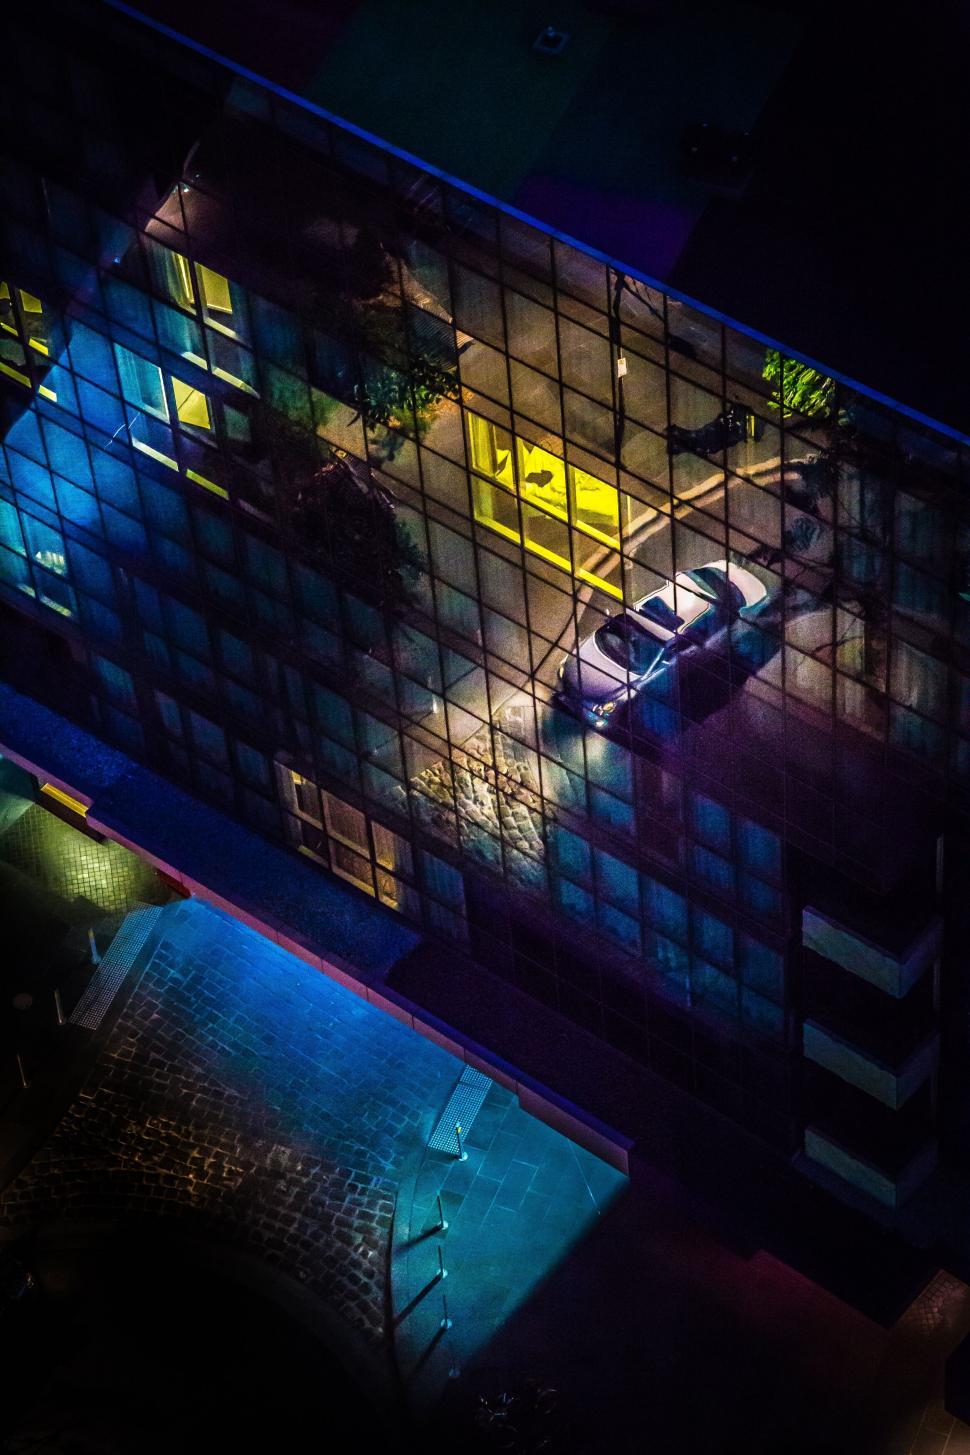 Free Image of Aerial view of a building rooftop at night 